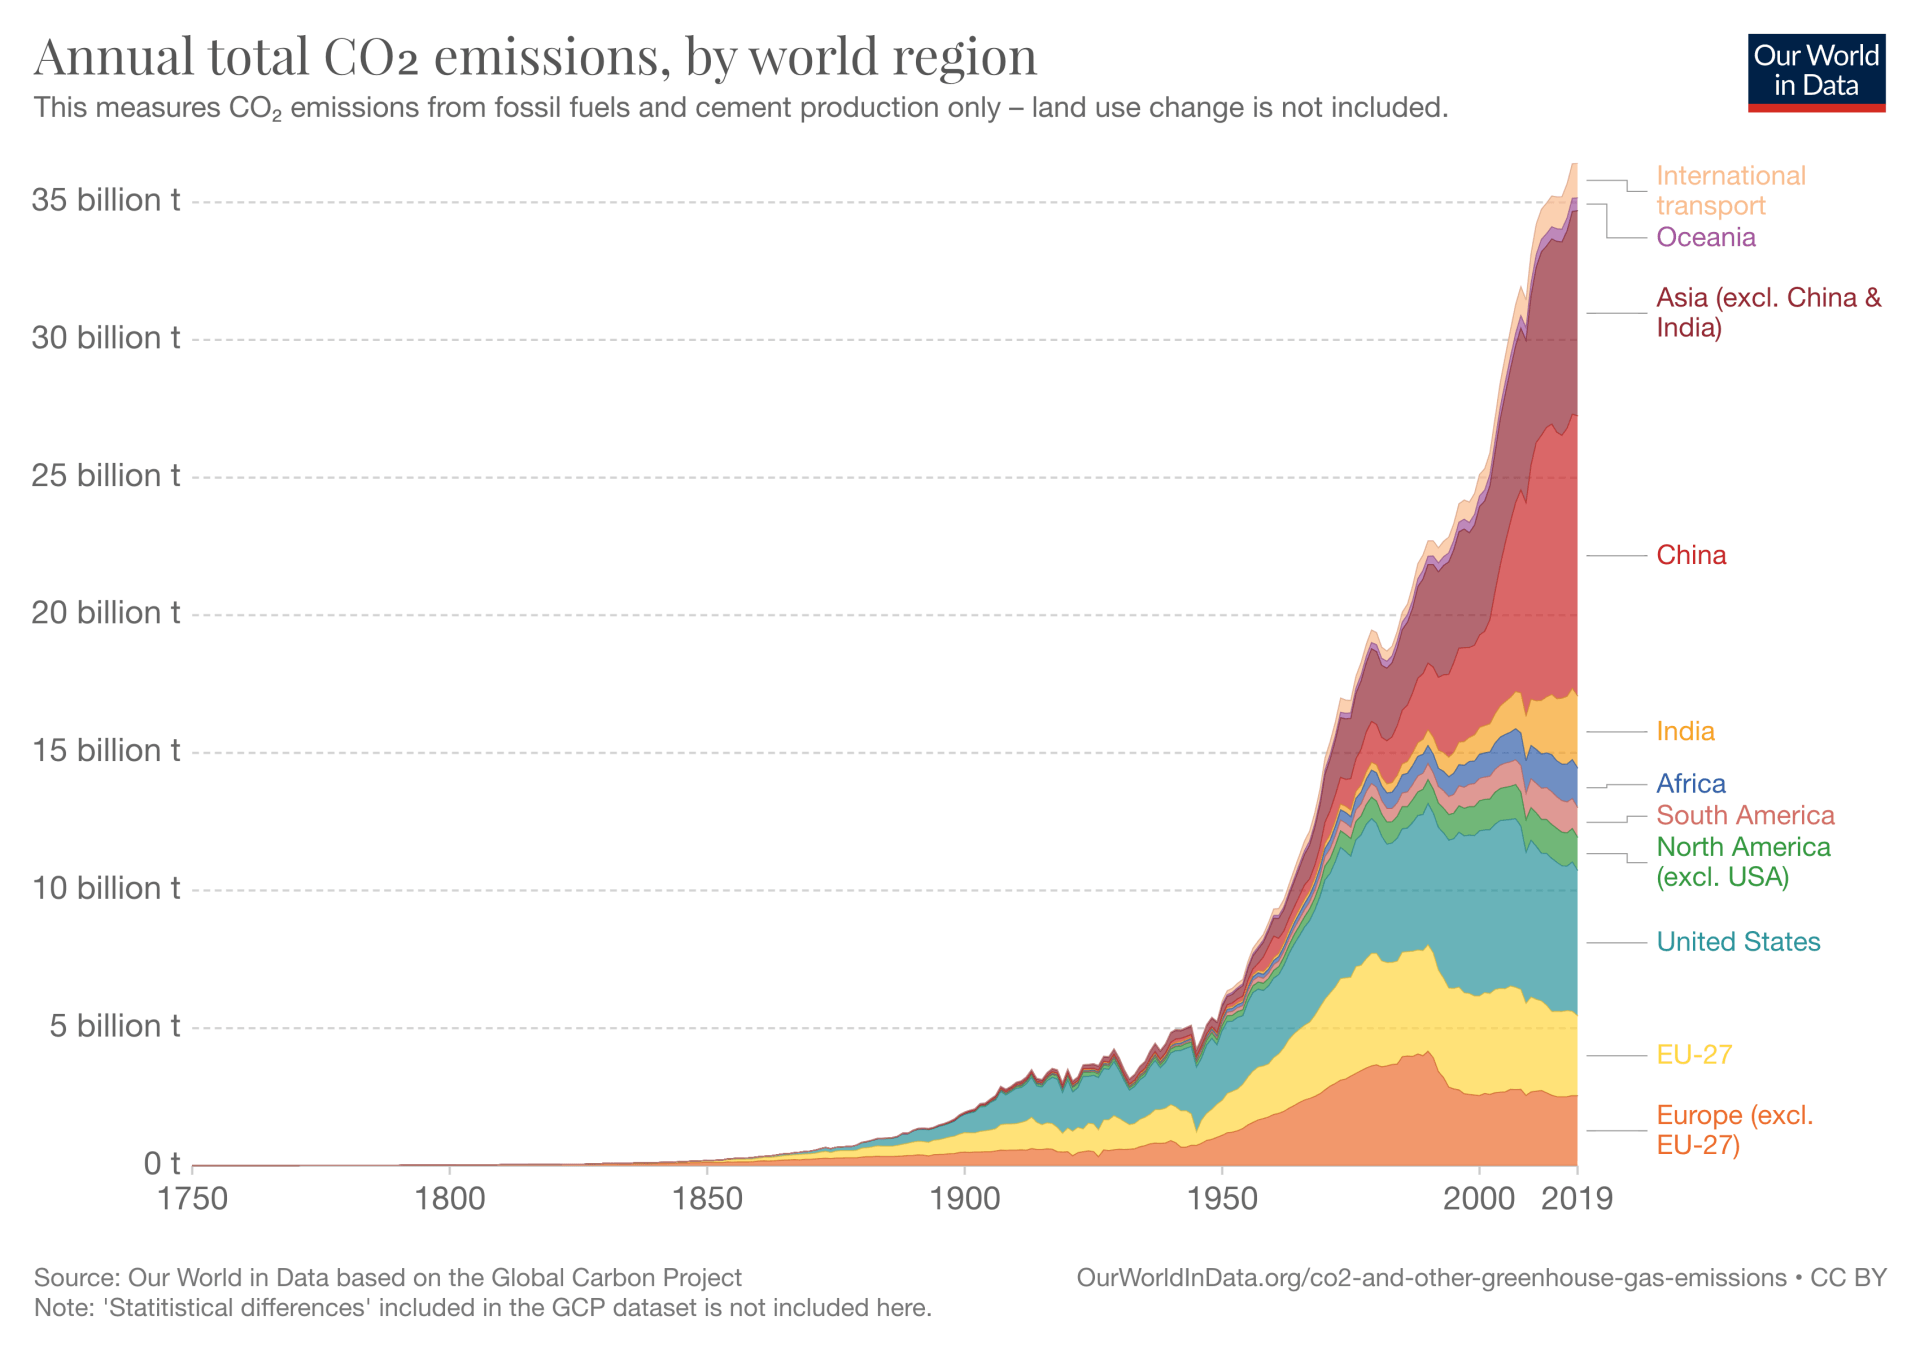 graph from Our World in Data showing annual total CO2 emissions by world region